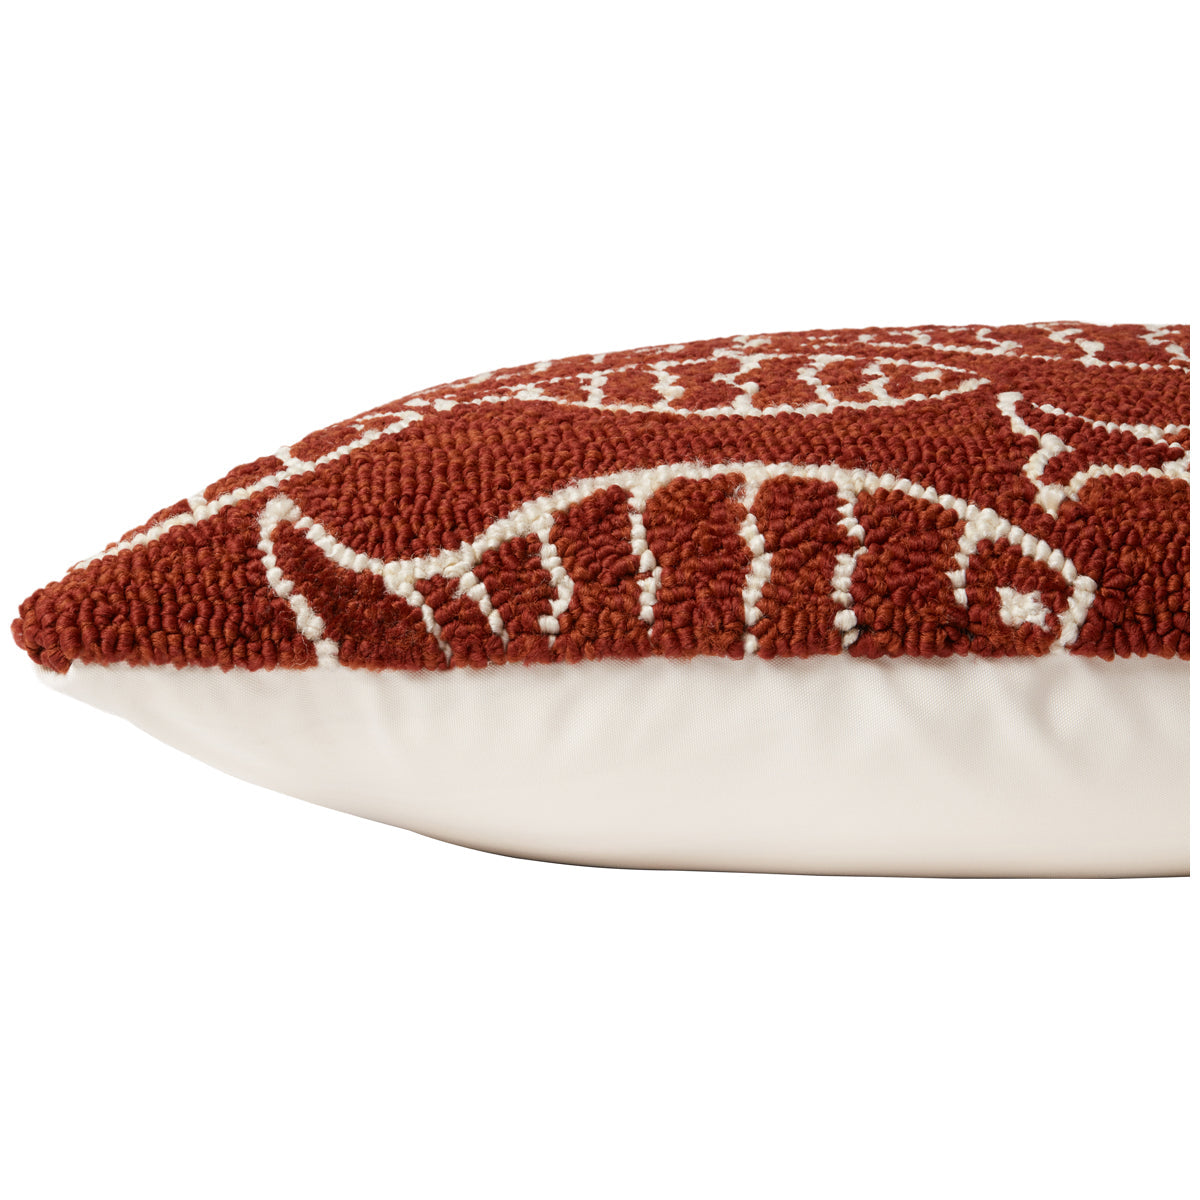 Loloi P0908 16&quot; x 26&quot; Hooked Pillow, Set of 2